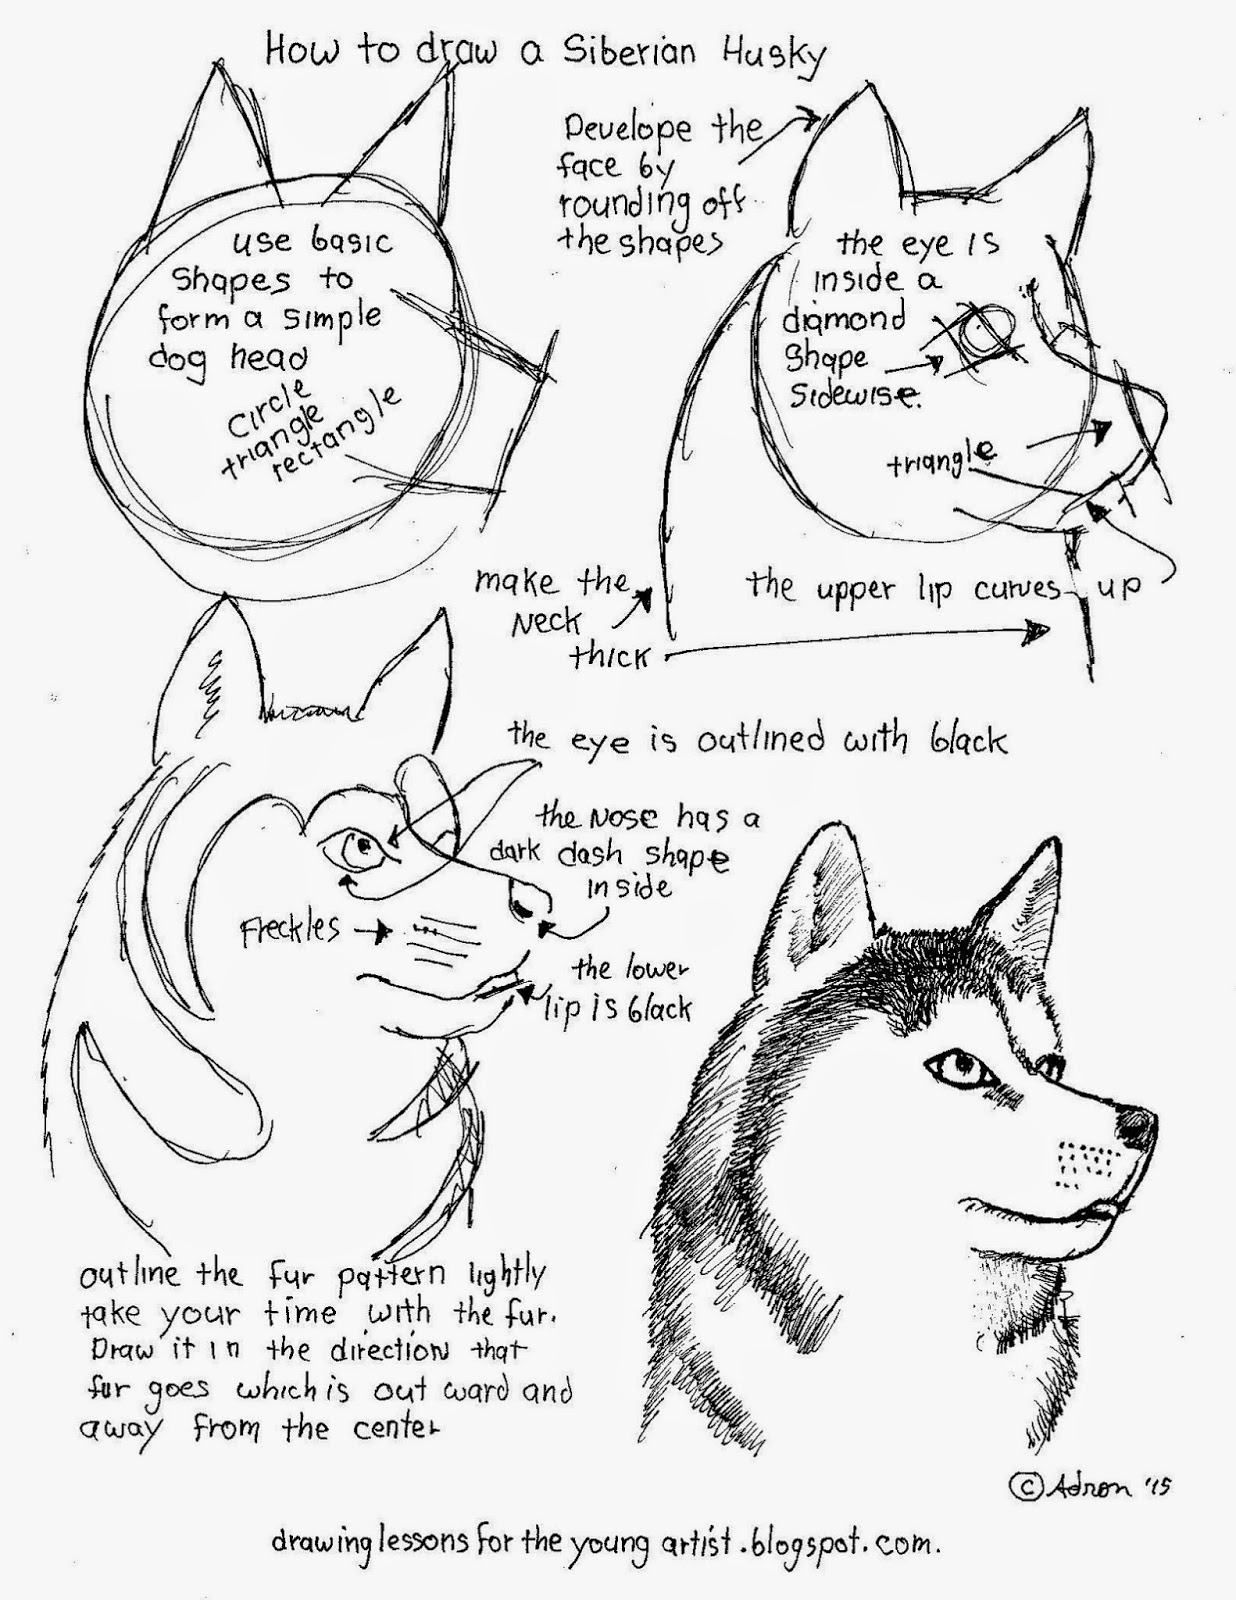 Download How to Draw Worksheets for The Young Artist: How to Draw A Siberian Husky Free Printable Worksheet